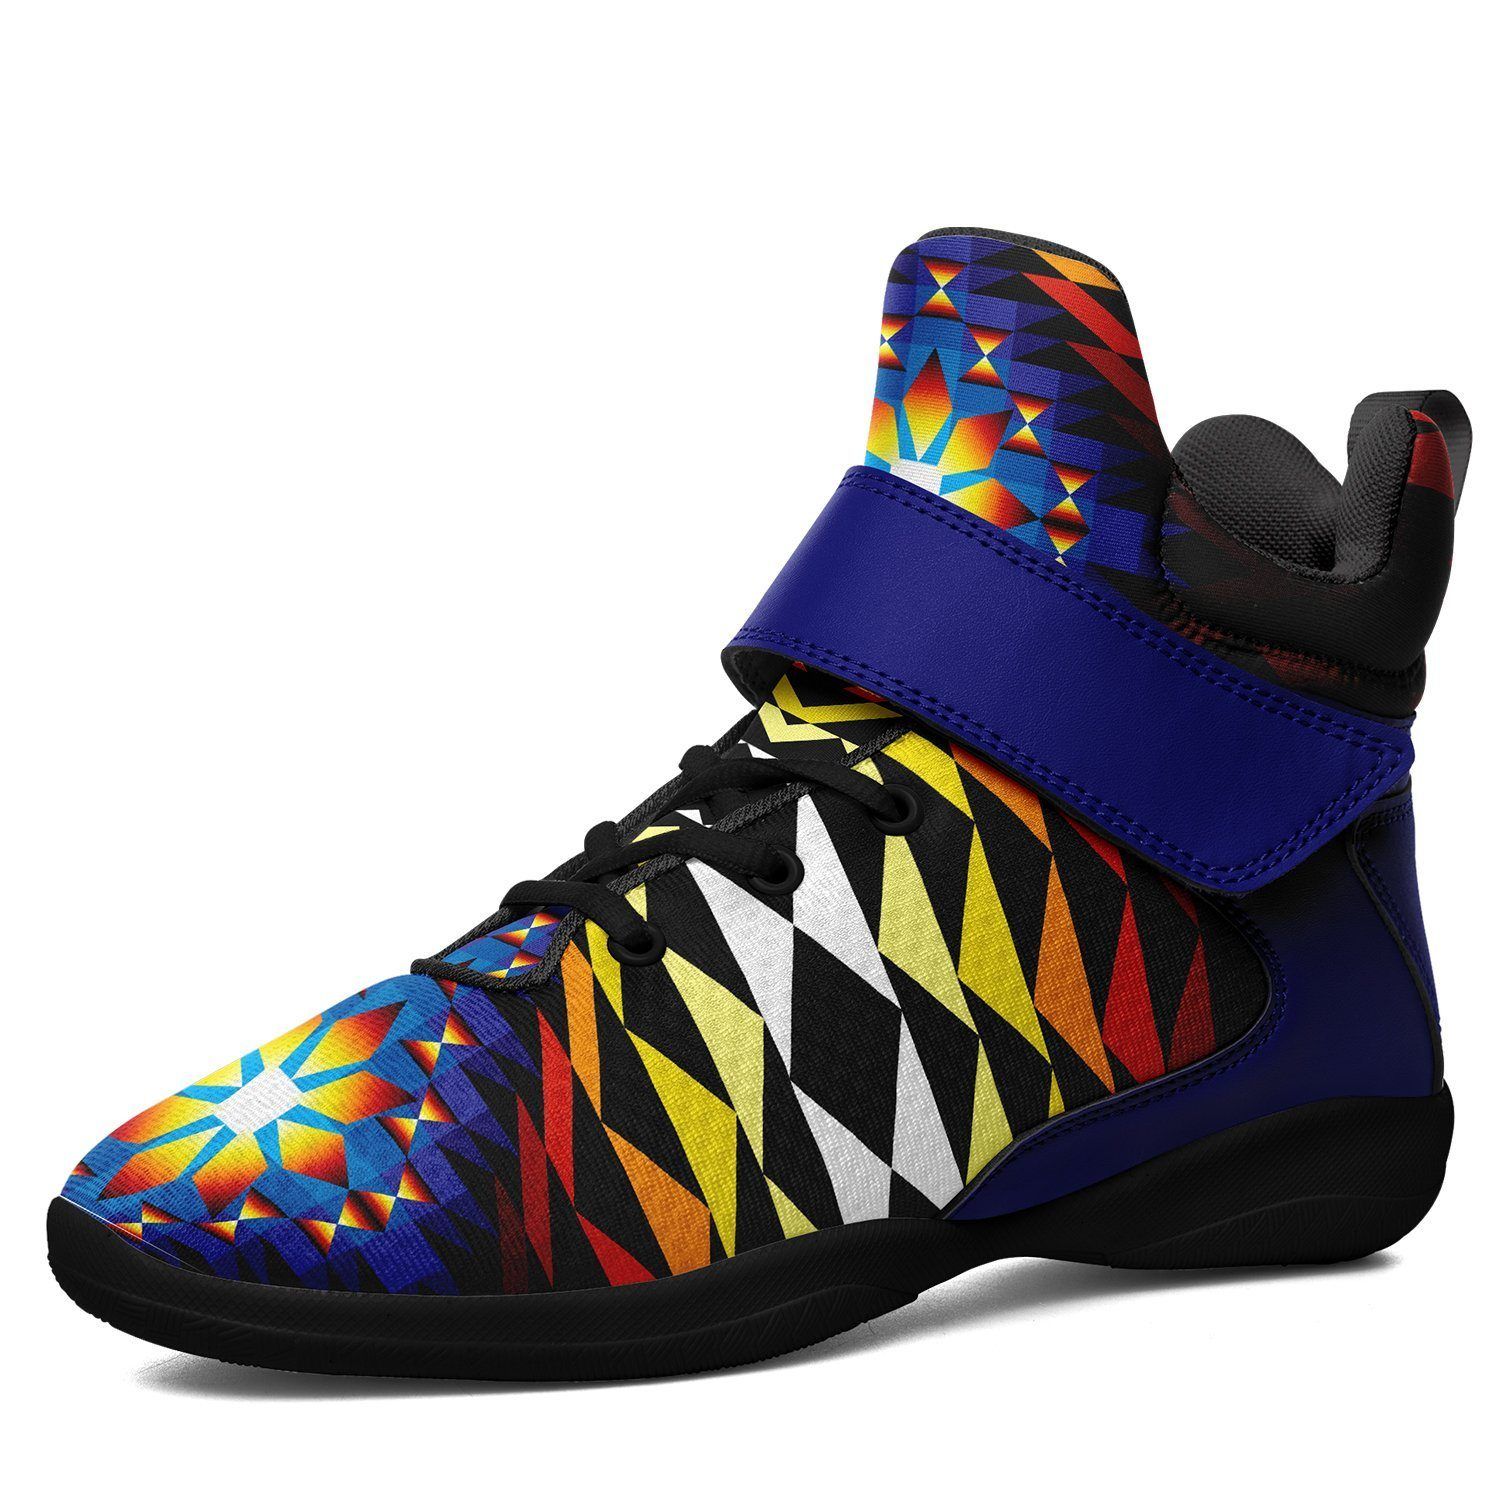 Sunset Blanket Kid's Ipottaa Basketball / Sport High Top Shoes 49 Dzine US Child 12.5 / EUR 30 Black Sole with Blue Strap 